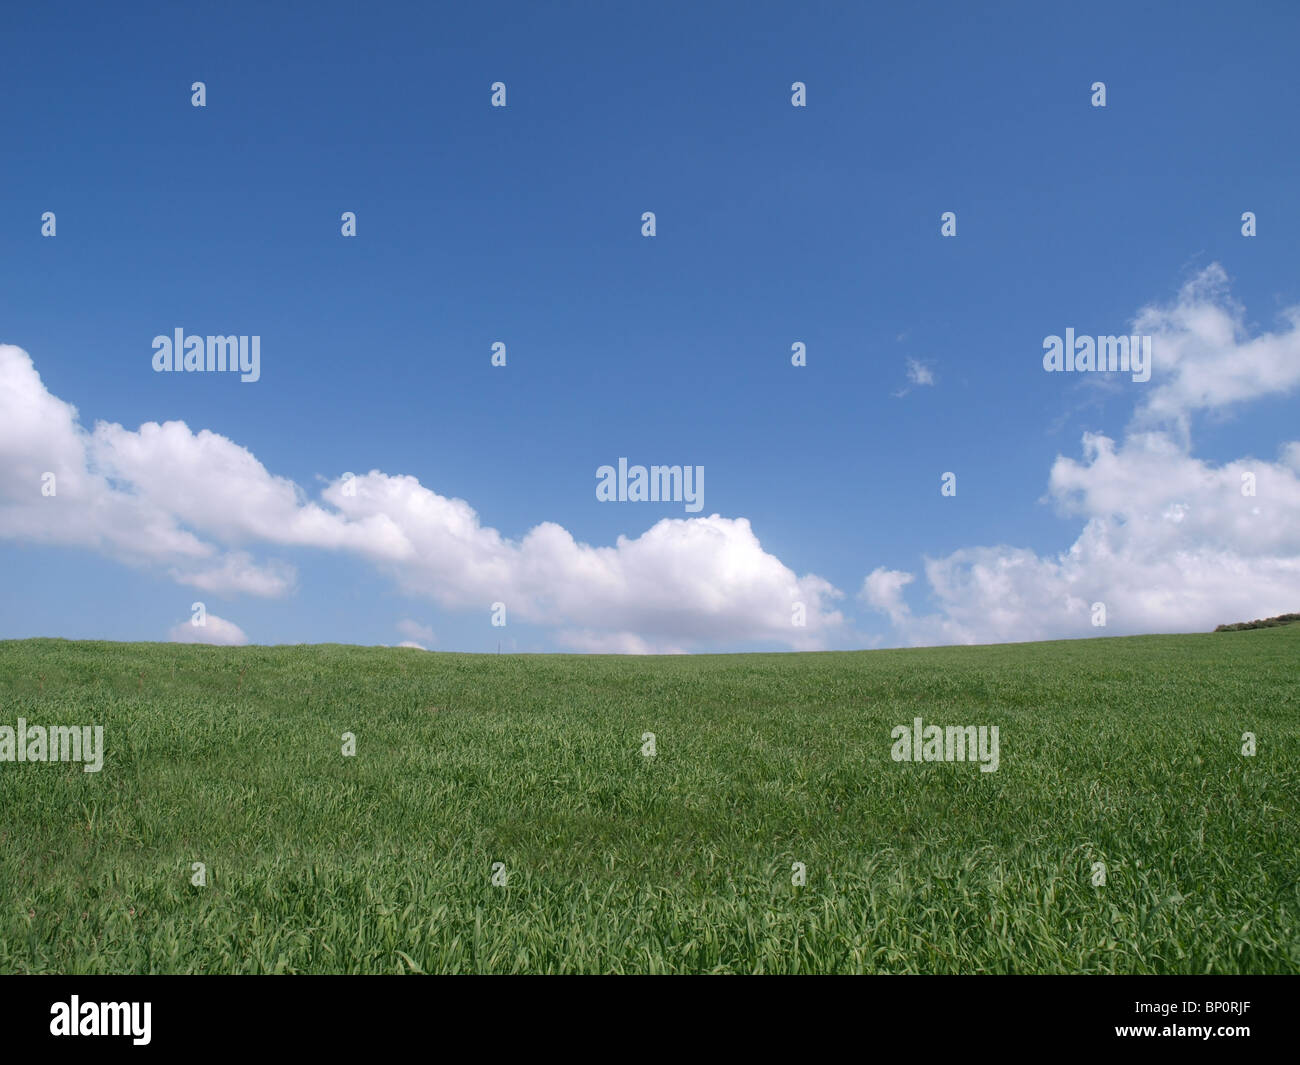 Green grass and a blue California sky on a perfect spring day. Stock Photo